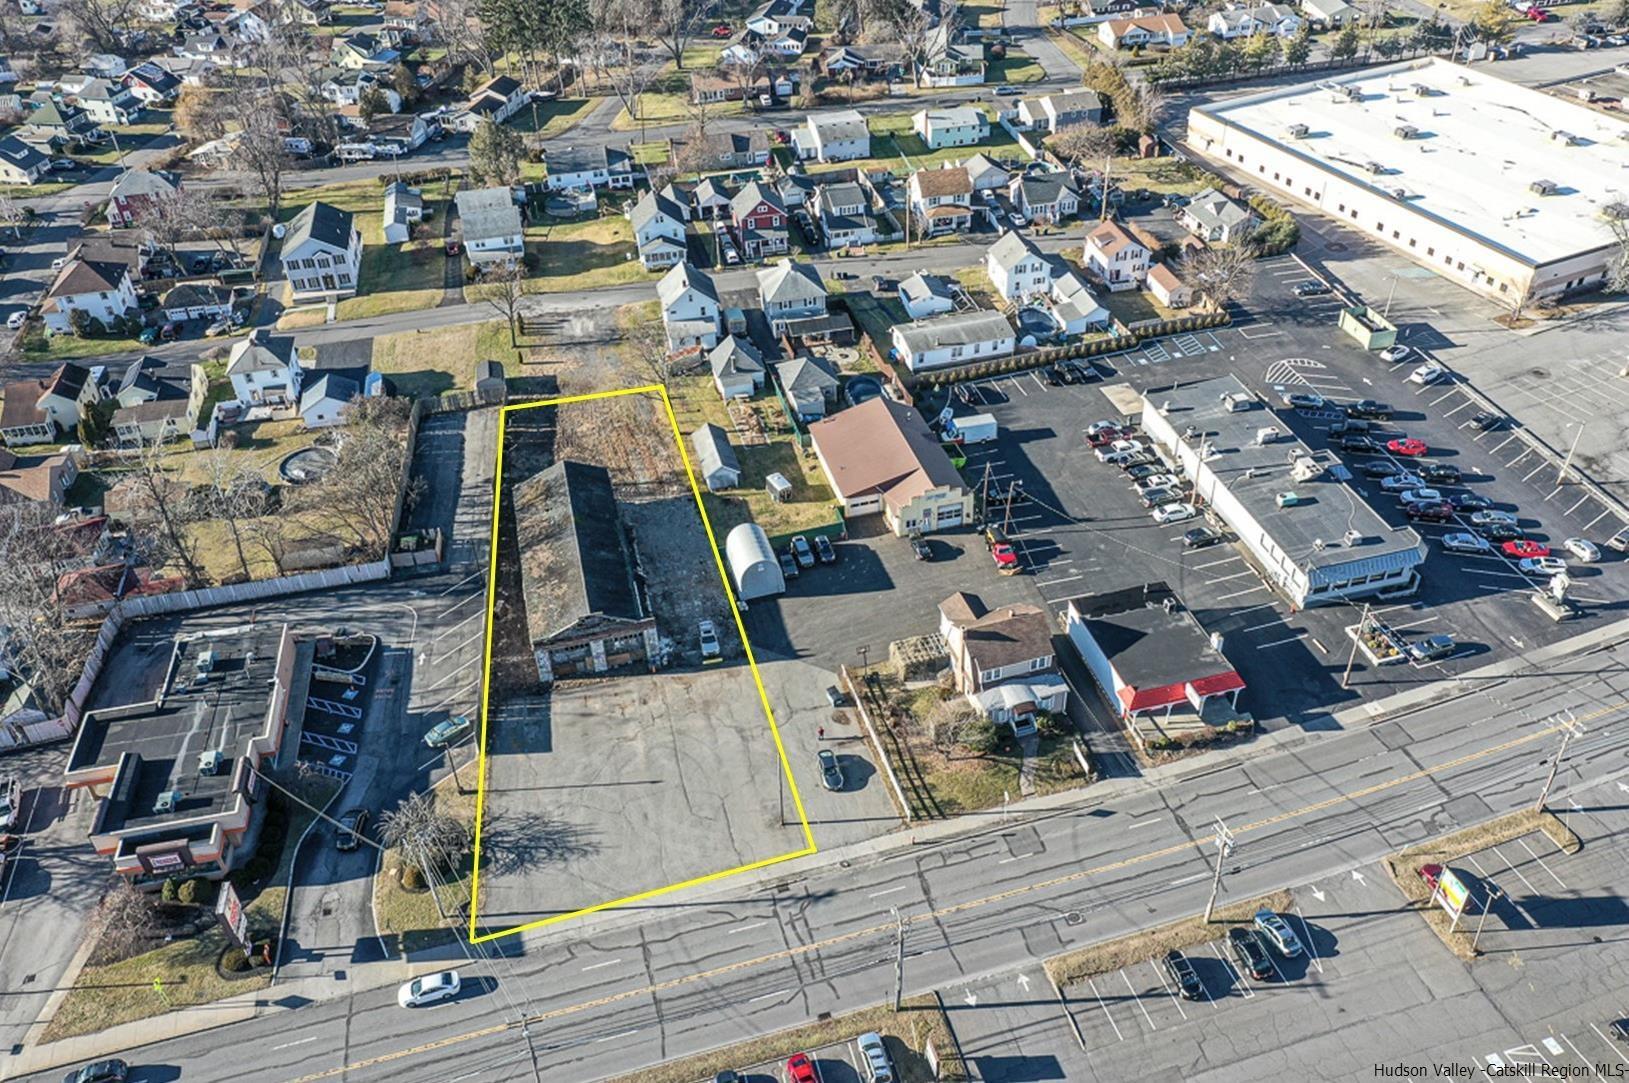 For Lease, (Lease asking $6,000 a month). 90 feet of road frontage. High traffic location on busy Albany Ave in Kingston (23,294 vehicles per day) The property measures 90 x 205 ft and features a 3,710 SF building. Flexible Highway Commercial zoning allows for most any use with plenty of parking. This building has 14 foot ceilings and would be great for a mechanics shop, fabrication, detailing, storage, etc. This property can be built out to desired specs offering a minimum of 1,500 sqft with store front at $3,500 per month. There may be some flexibility in the lease agreement depending on build out. Currently used as storage.